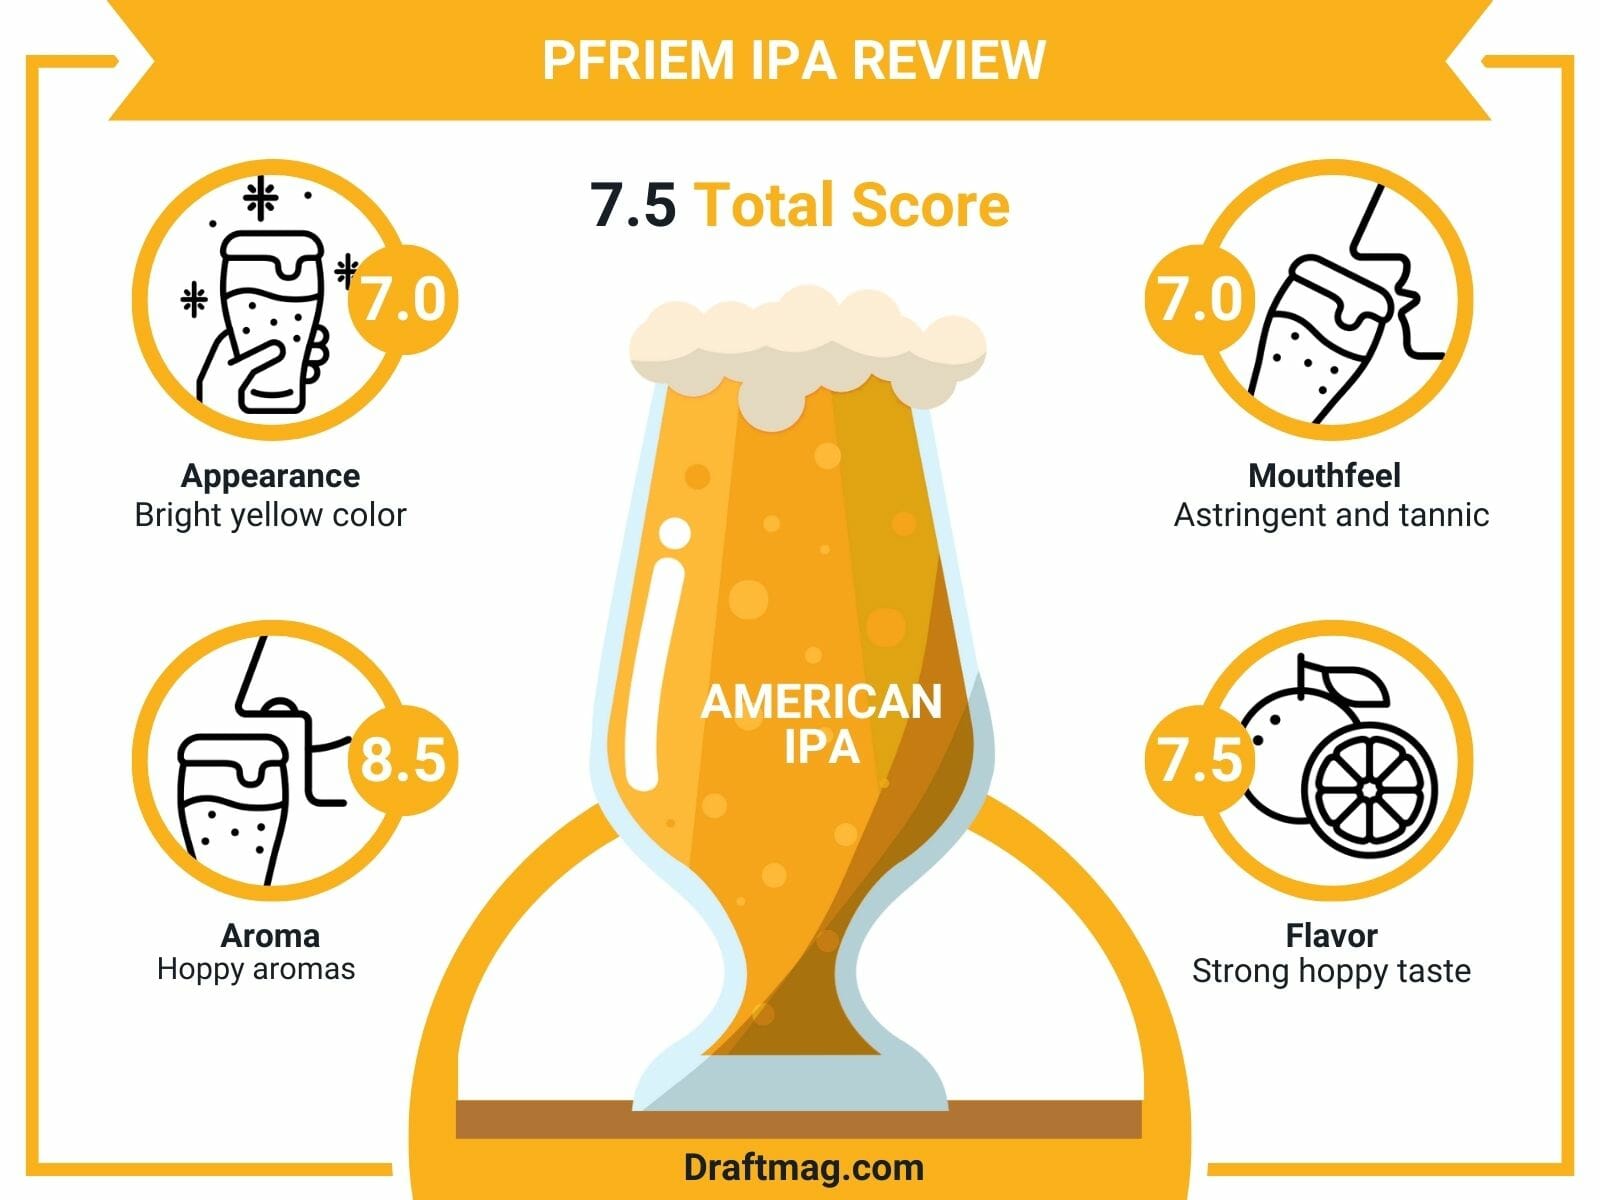 pFriem IPA Review Infographic